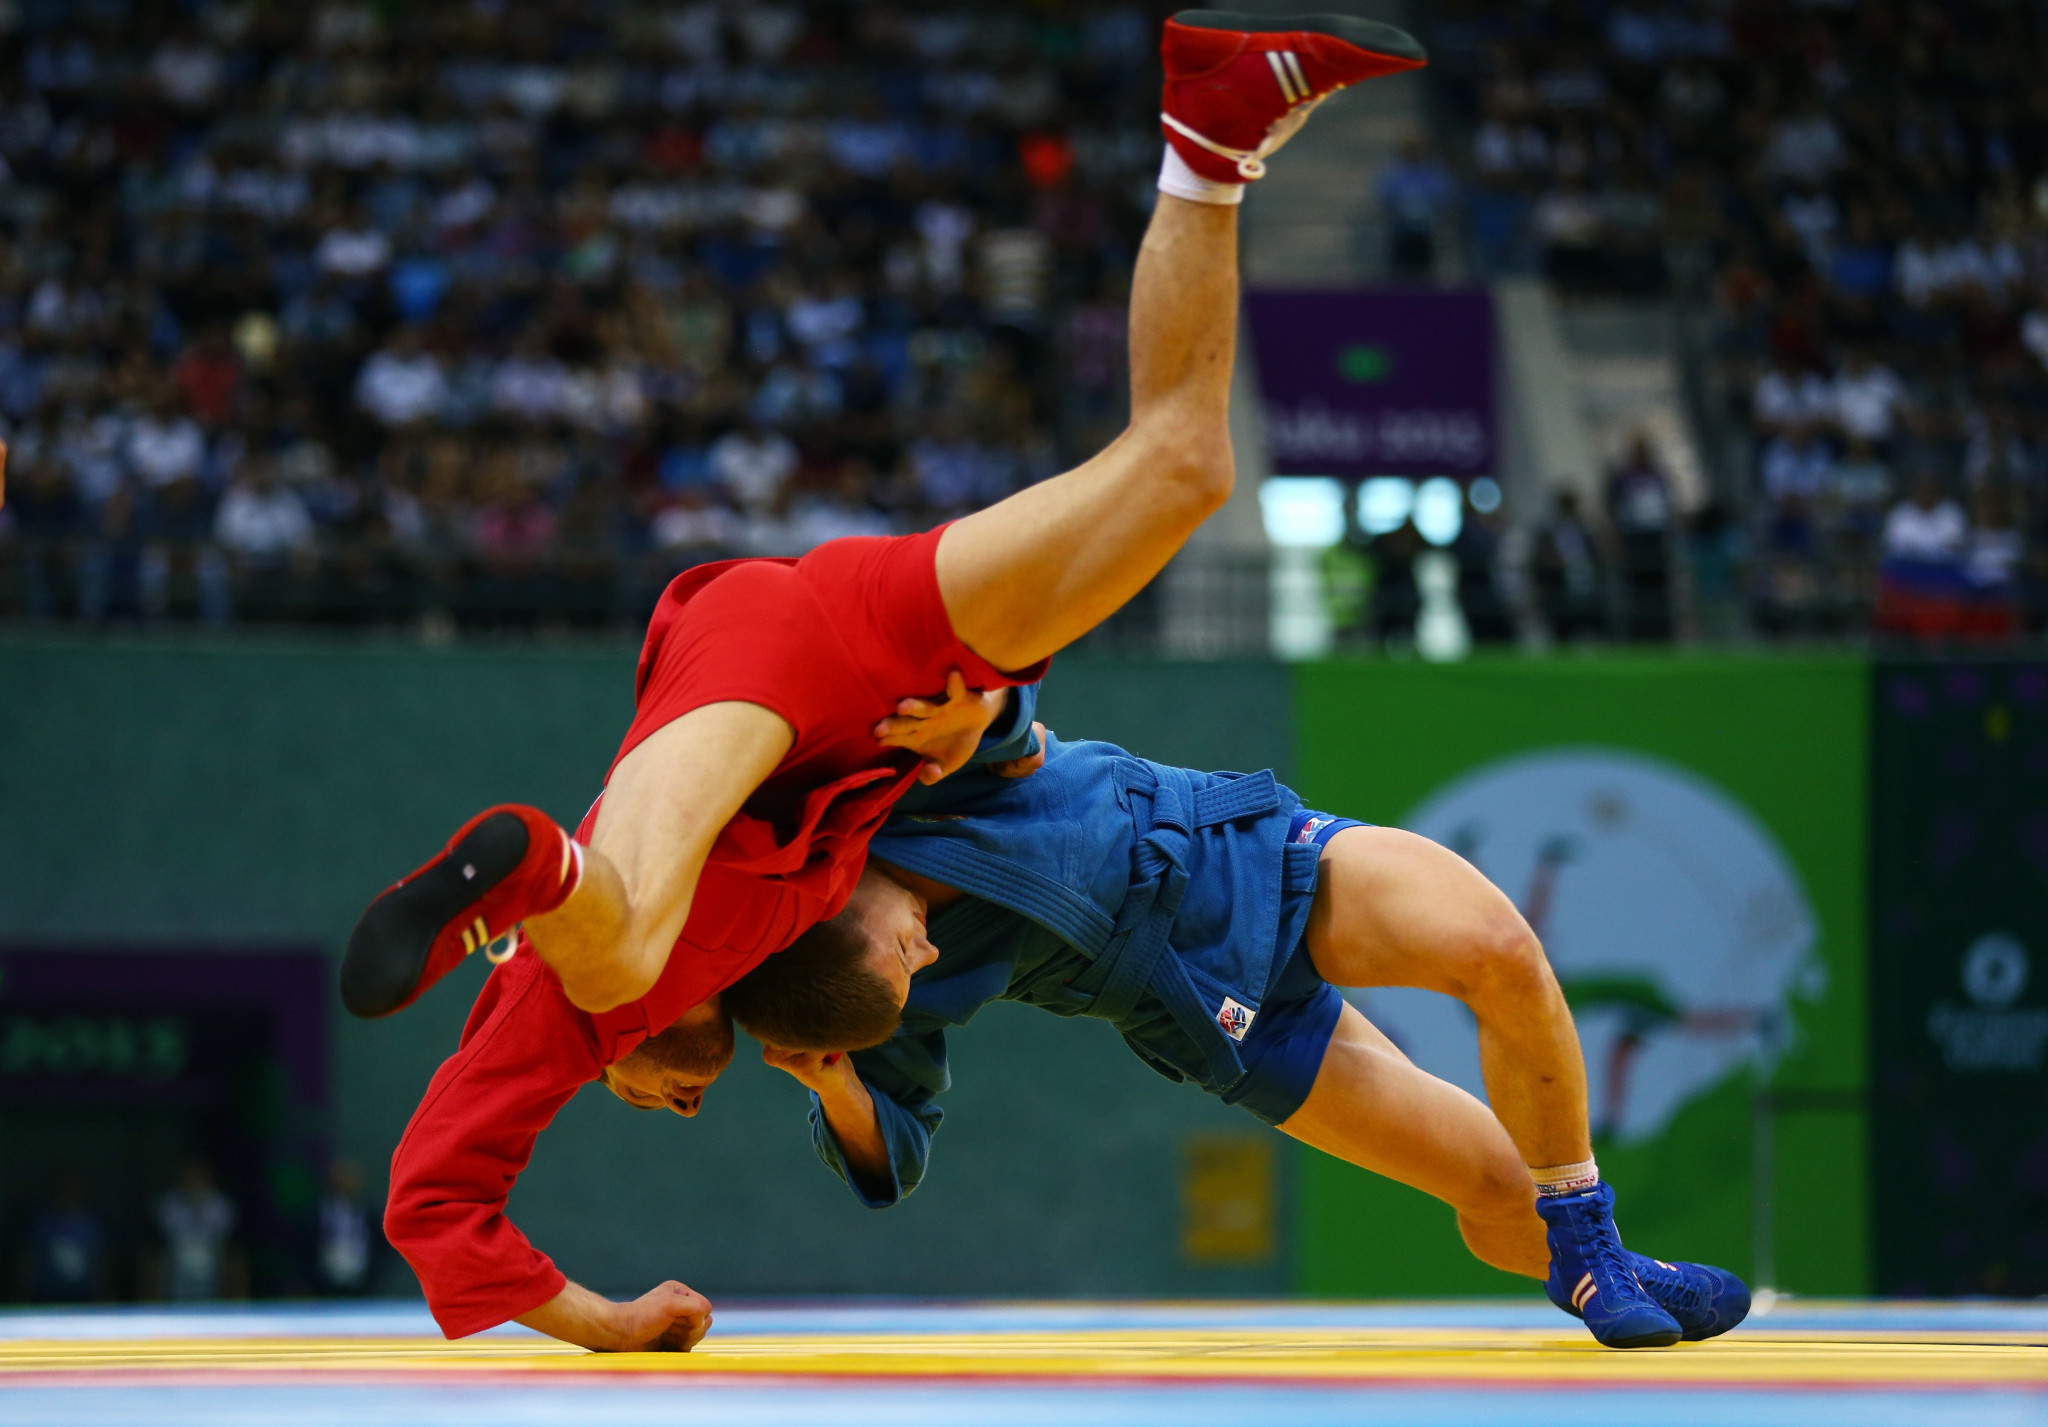 Russian and other sambists have earned high praise for their performances at the European Championships in Haifa ©Getty Images